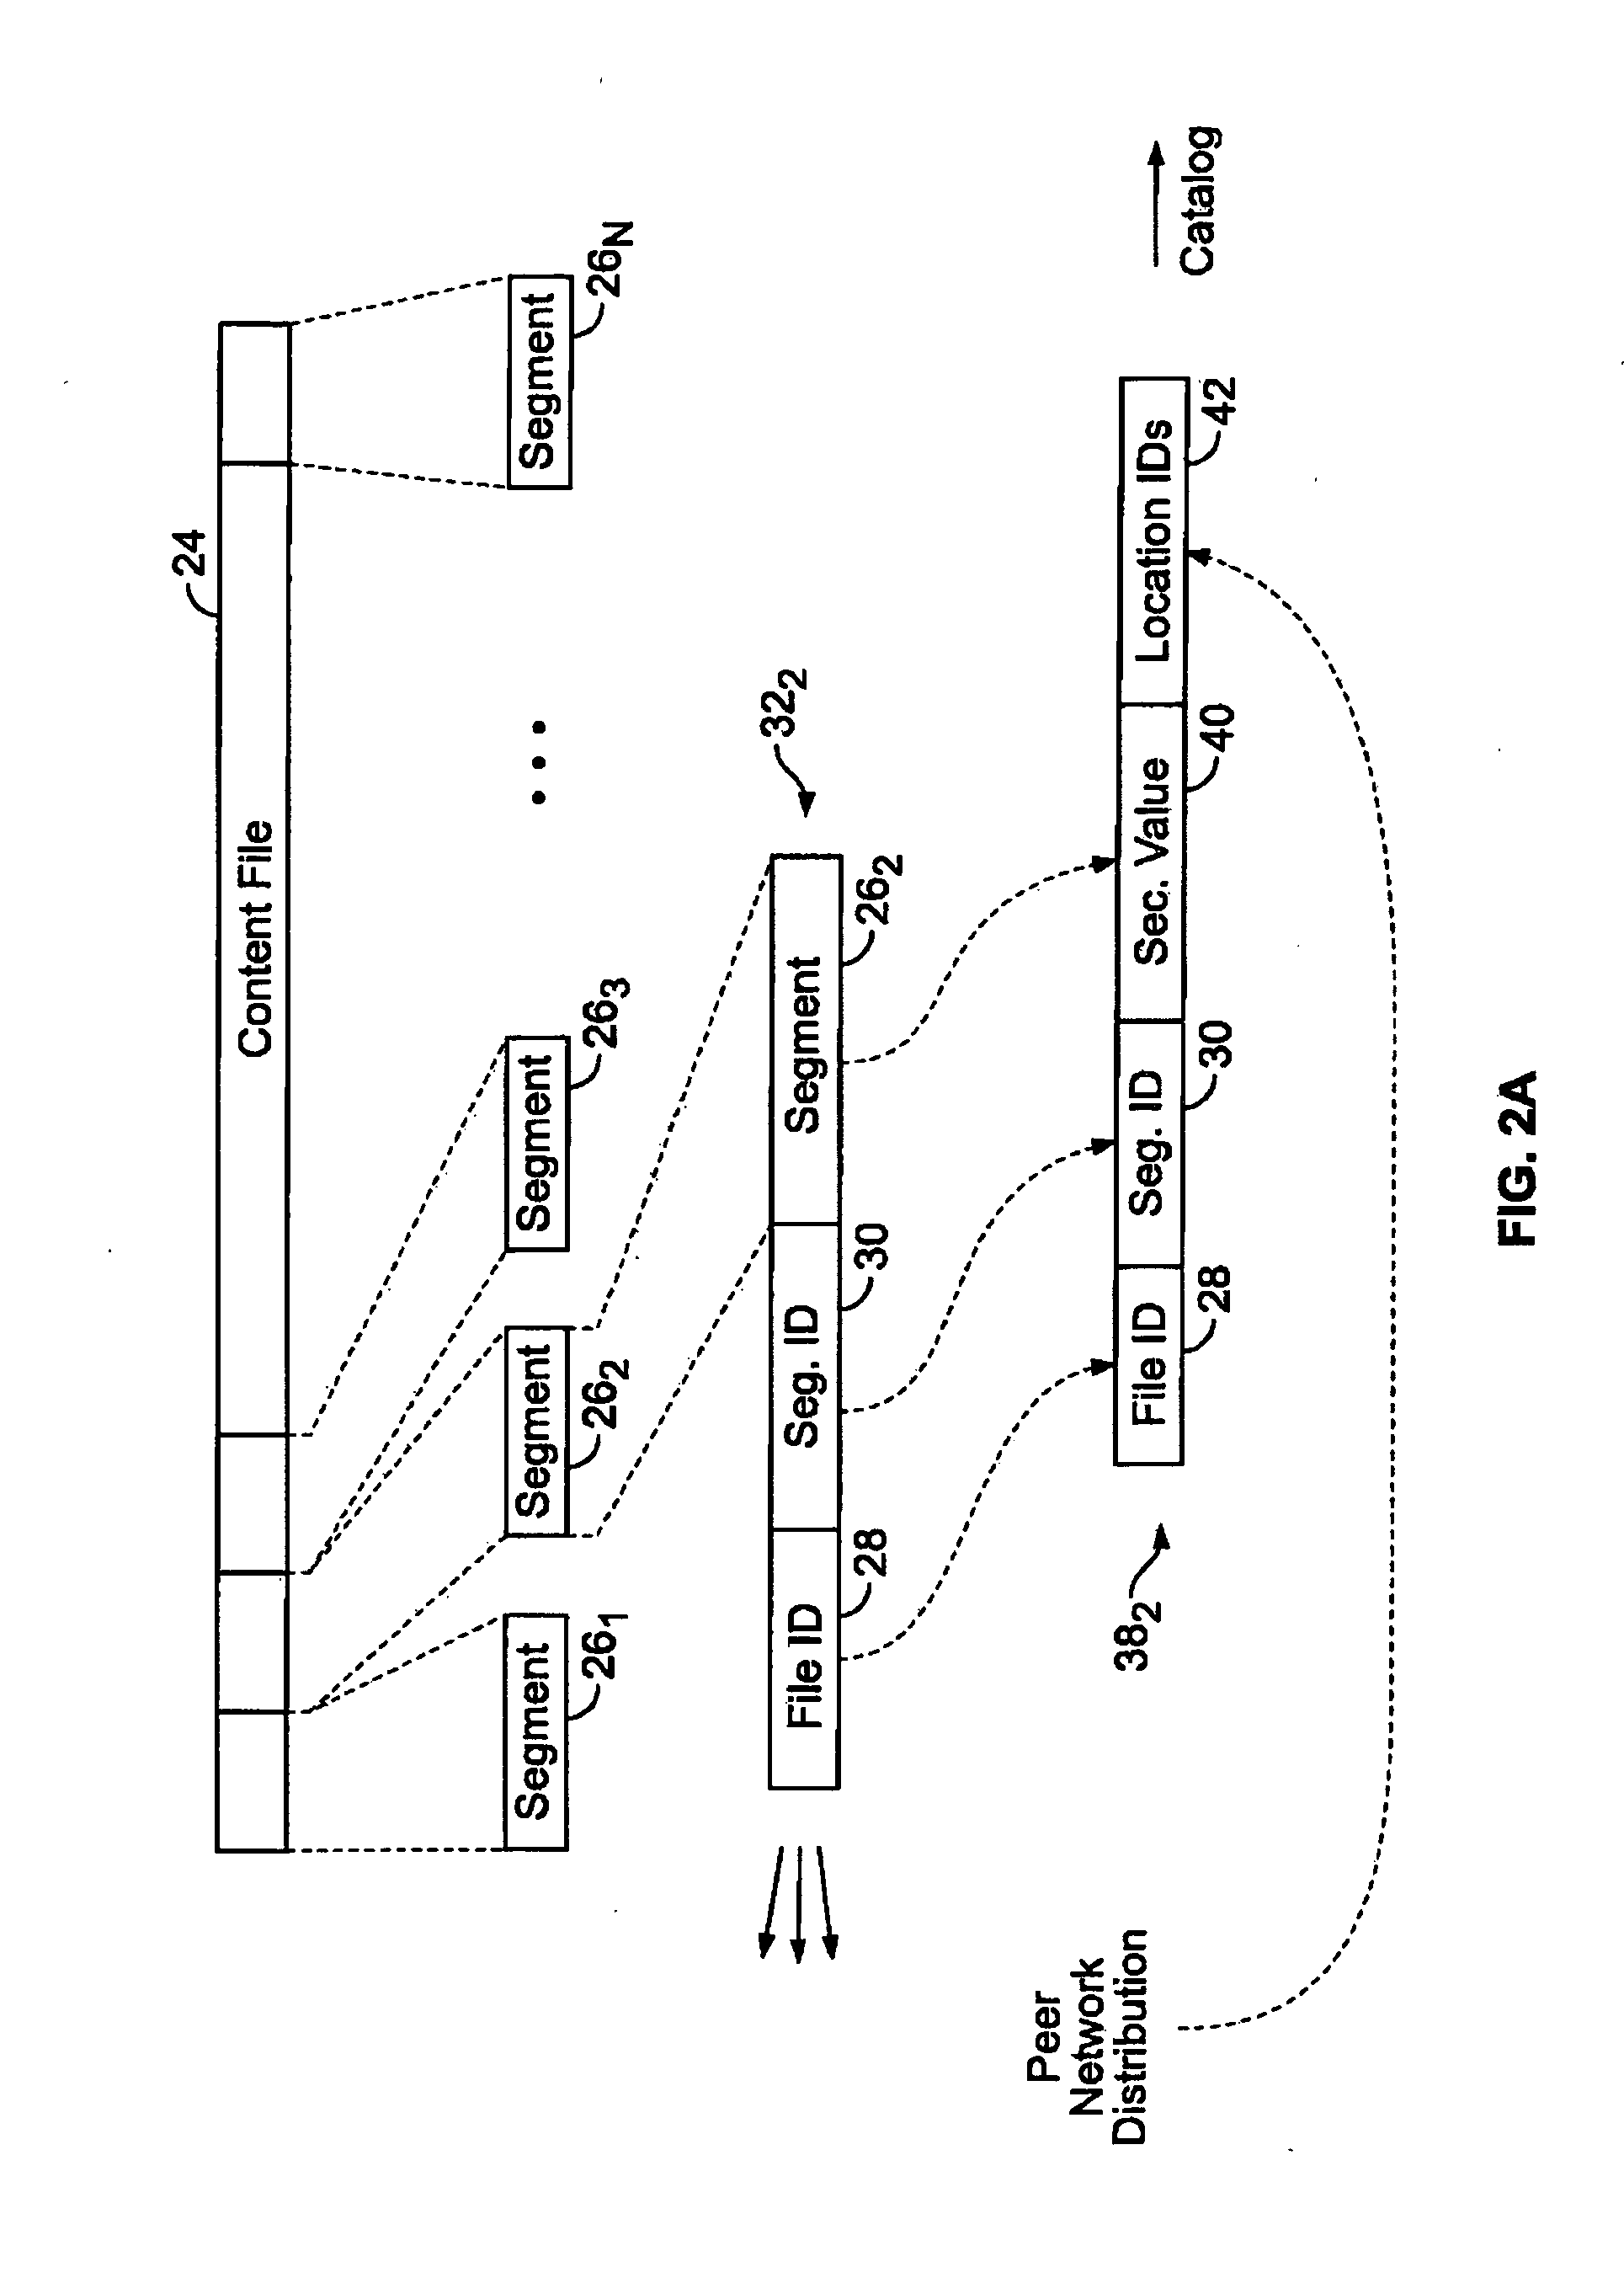 Mediated multi-source peer content delivery network architecture